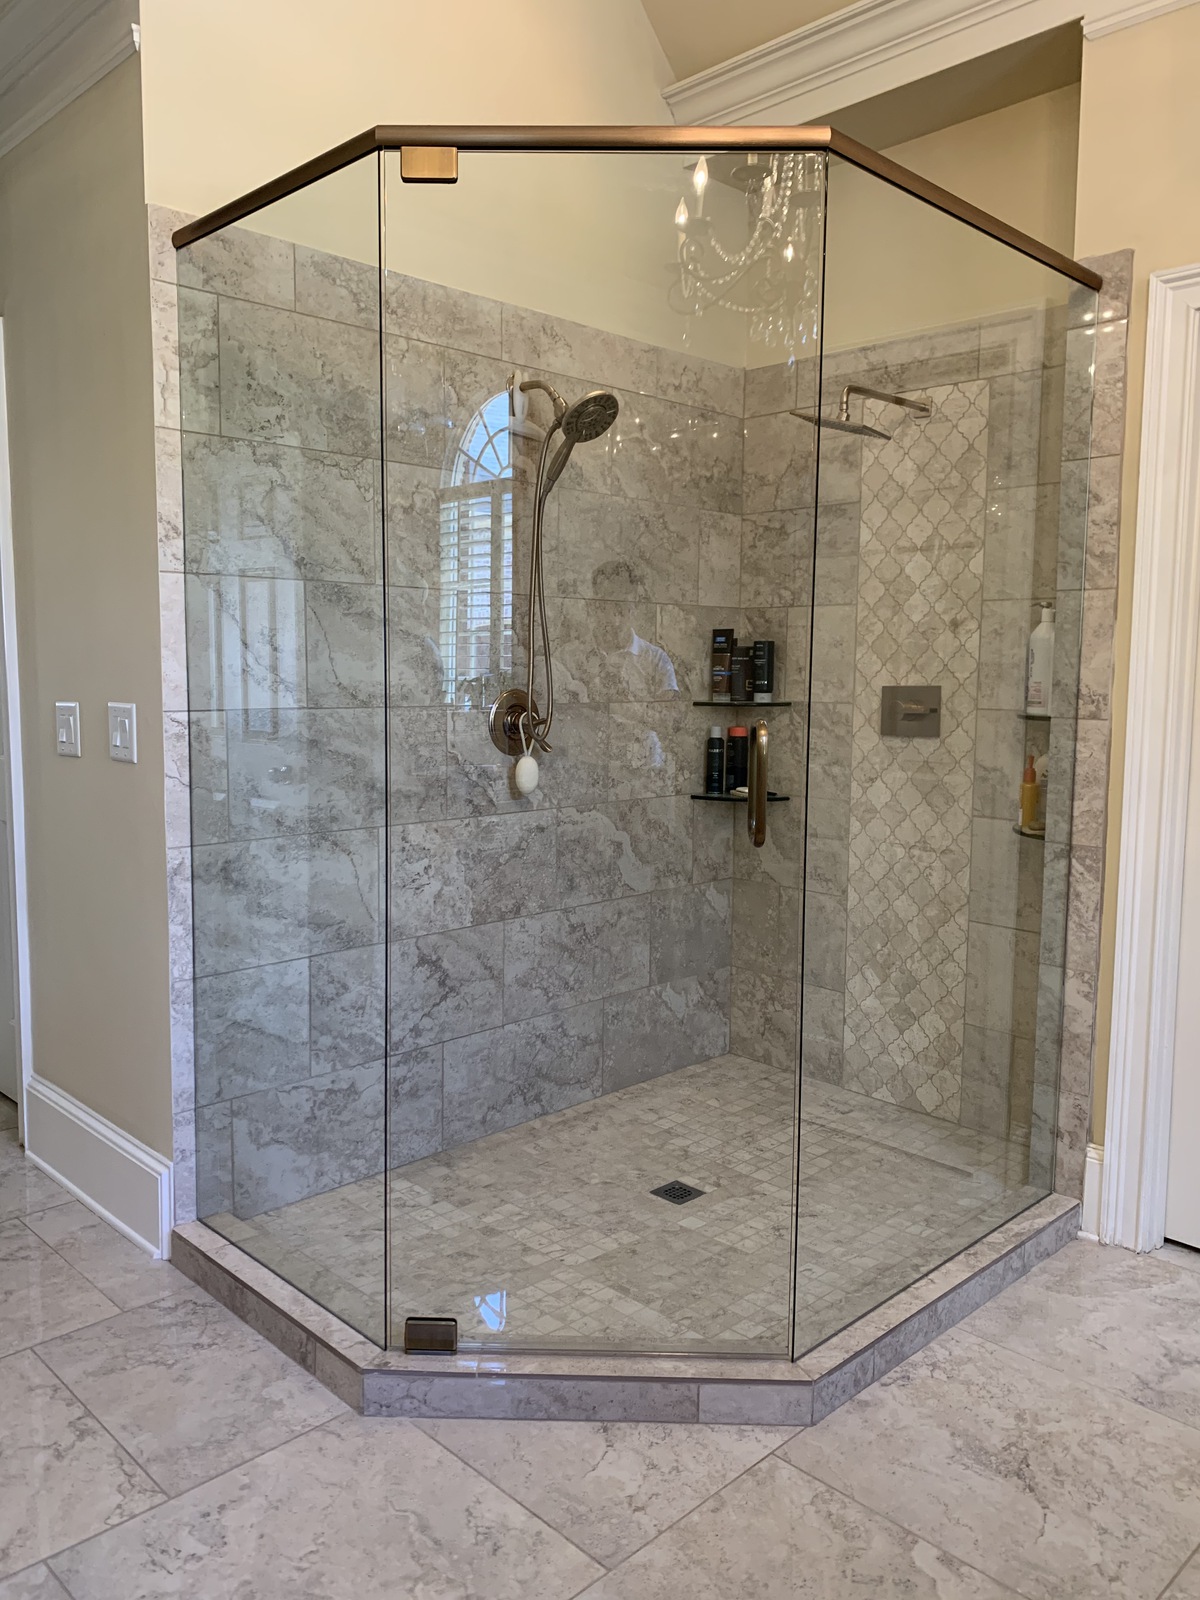 This shower is using antique brass hardware which is very unique and beautiful!